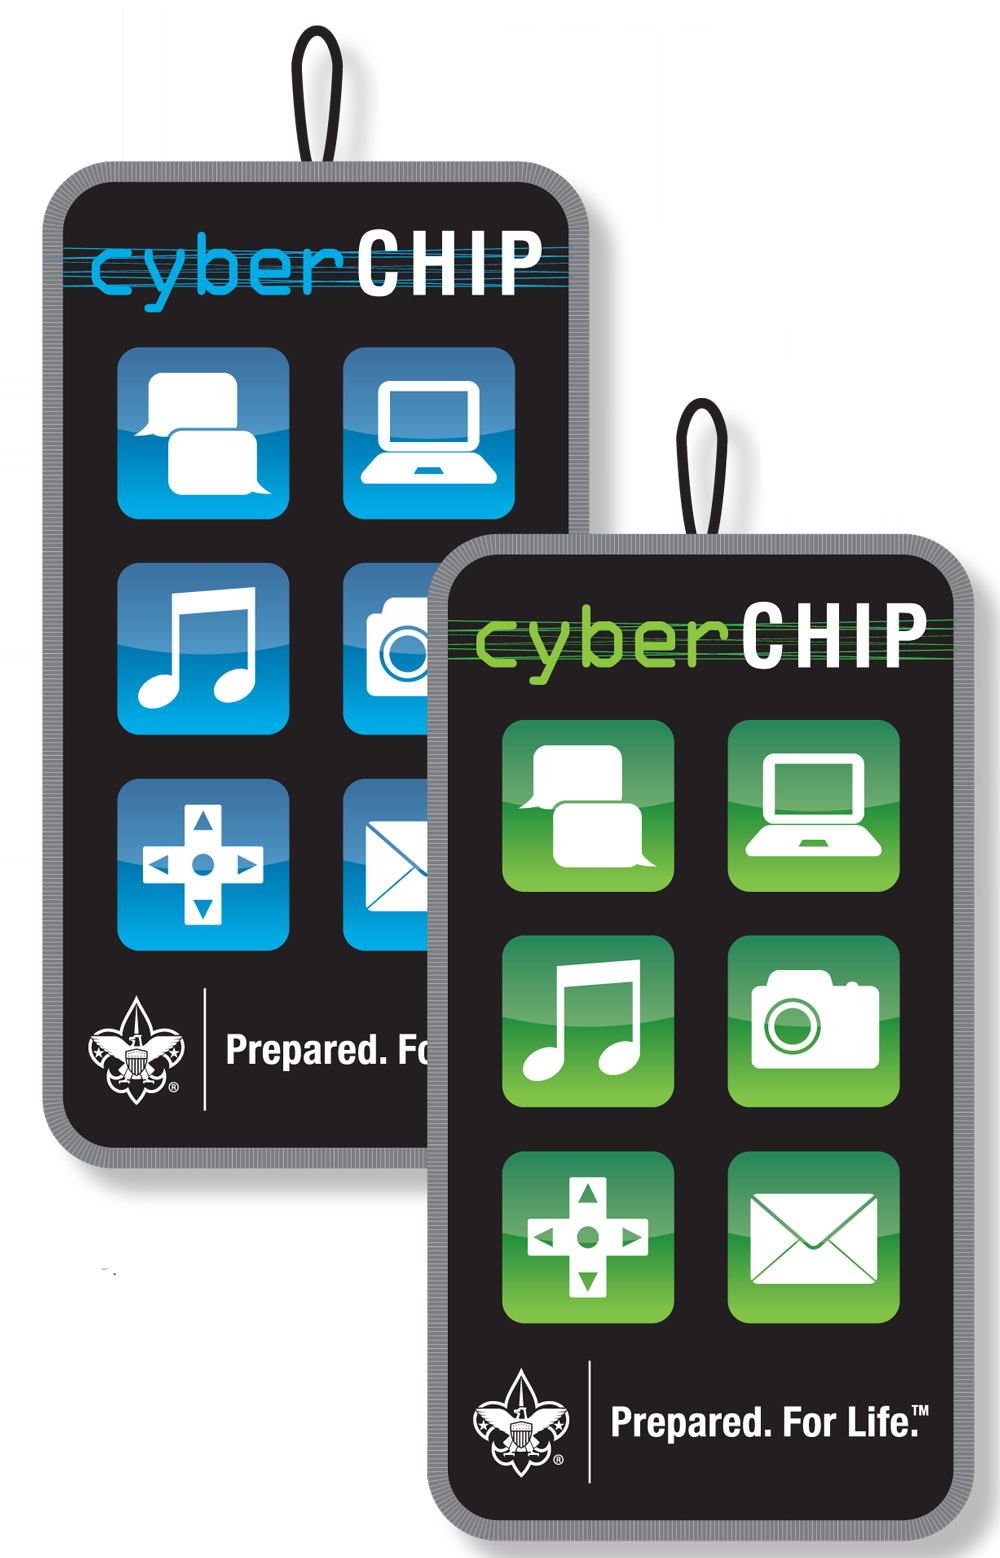 Scout Camp Fire Cyber Chip Requirements